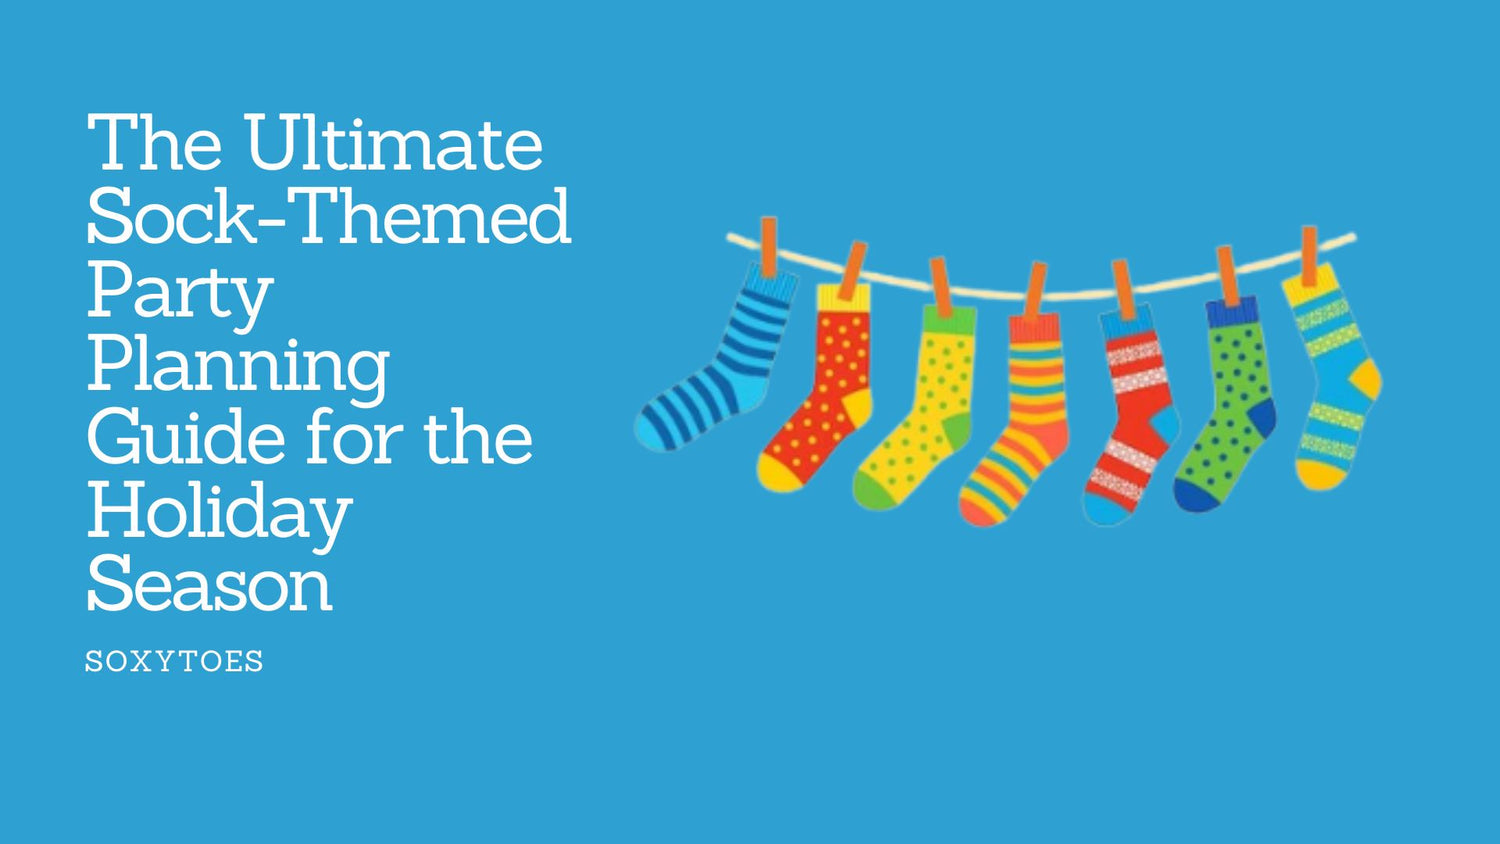 The Ultimate Sock-Themed Party Planning Guide for the Holiday Season